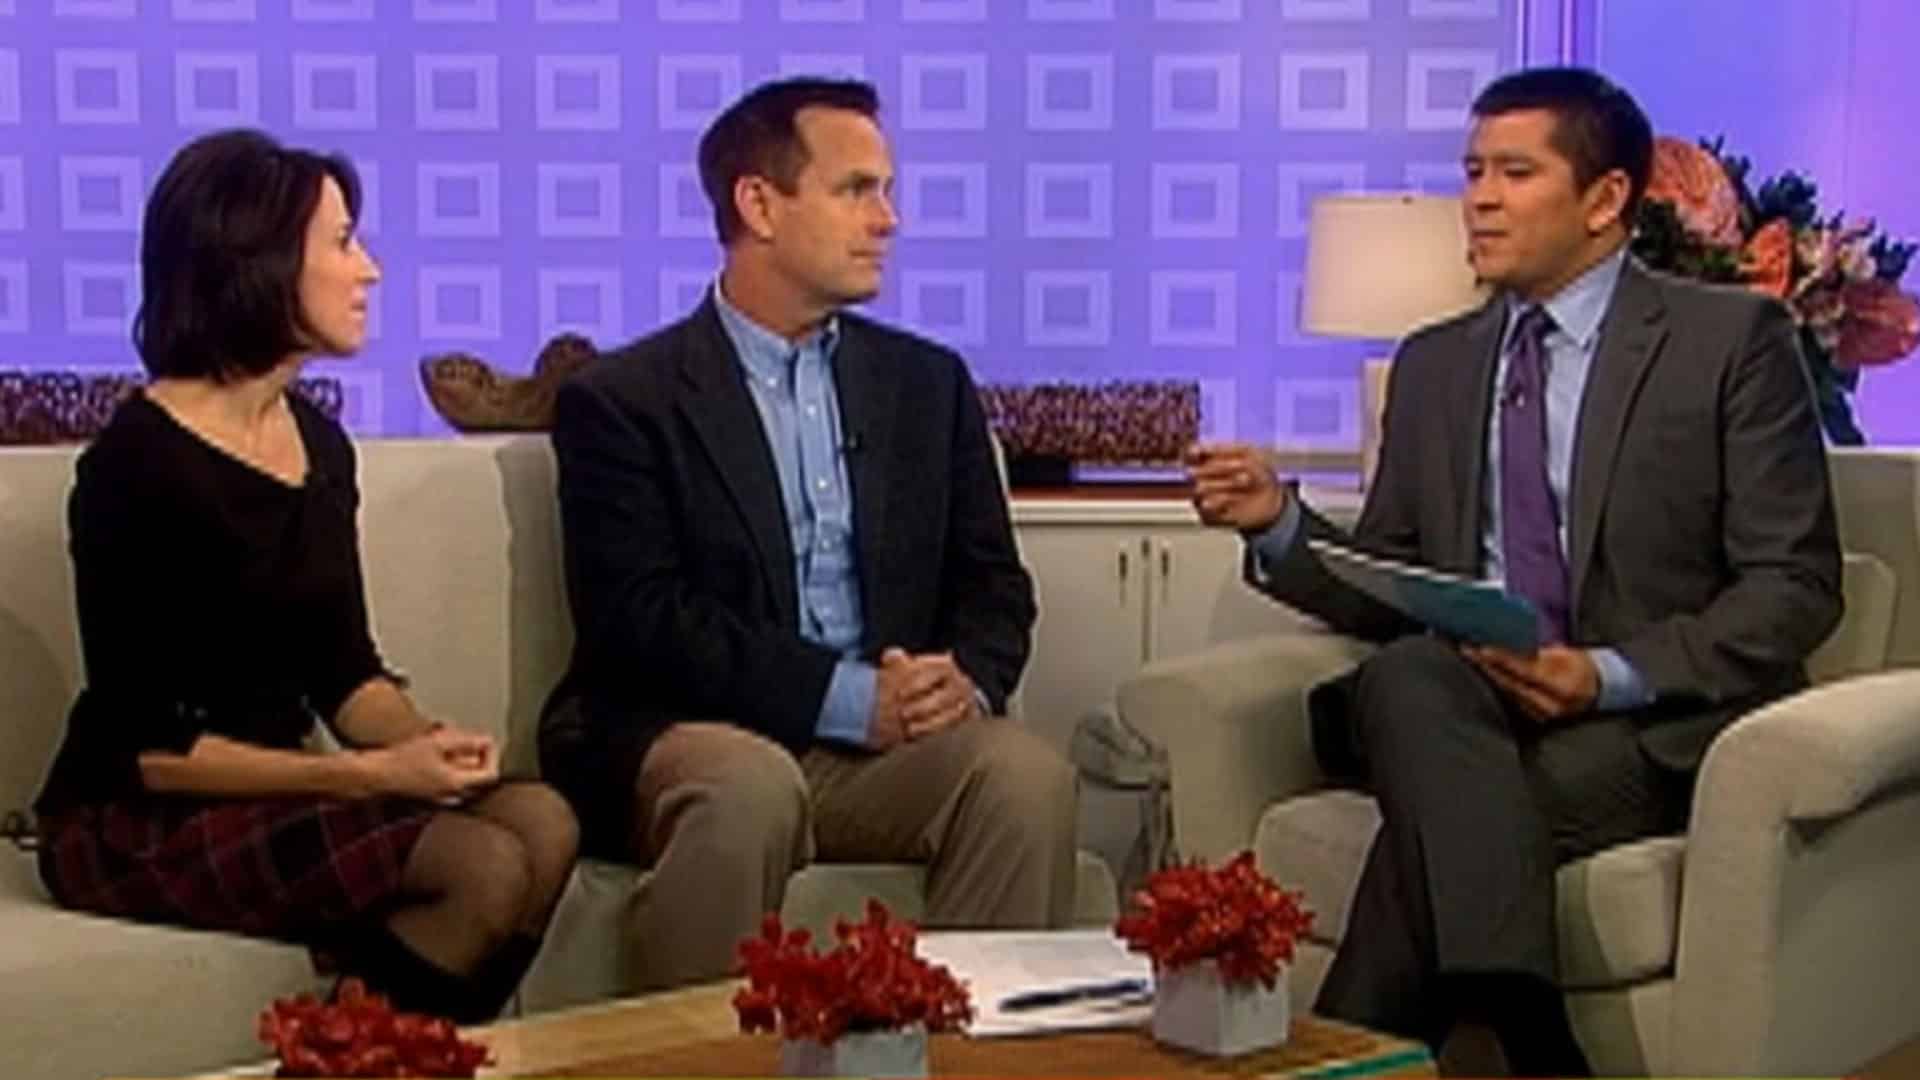 Today Show Appearance October 21, 2011